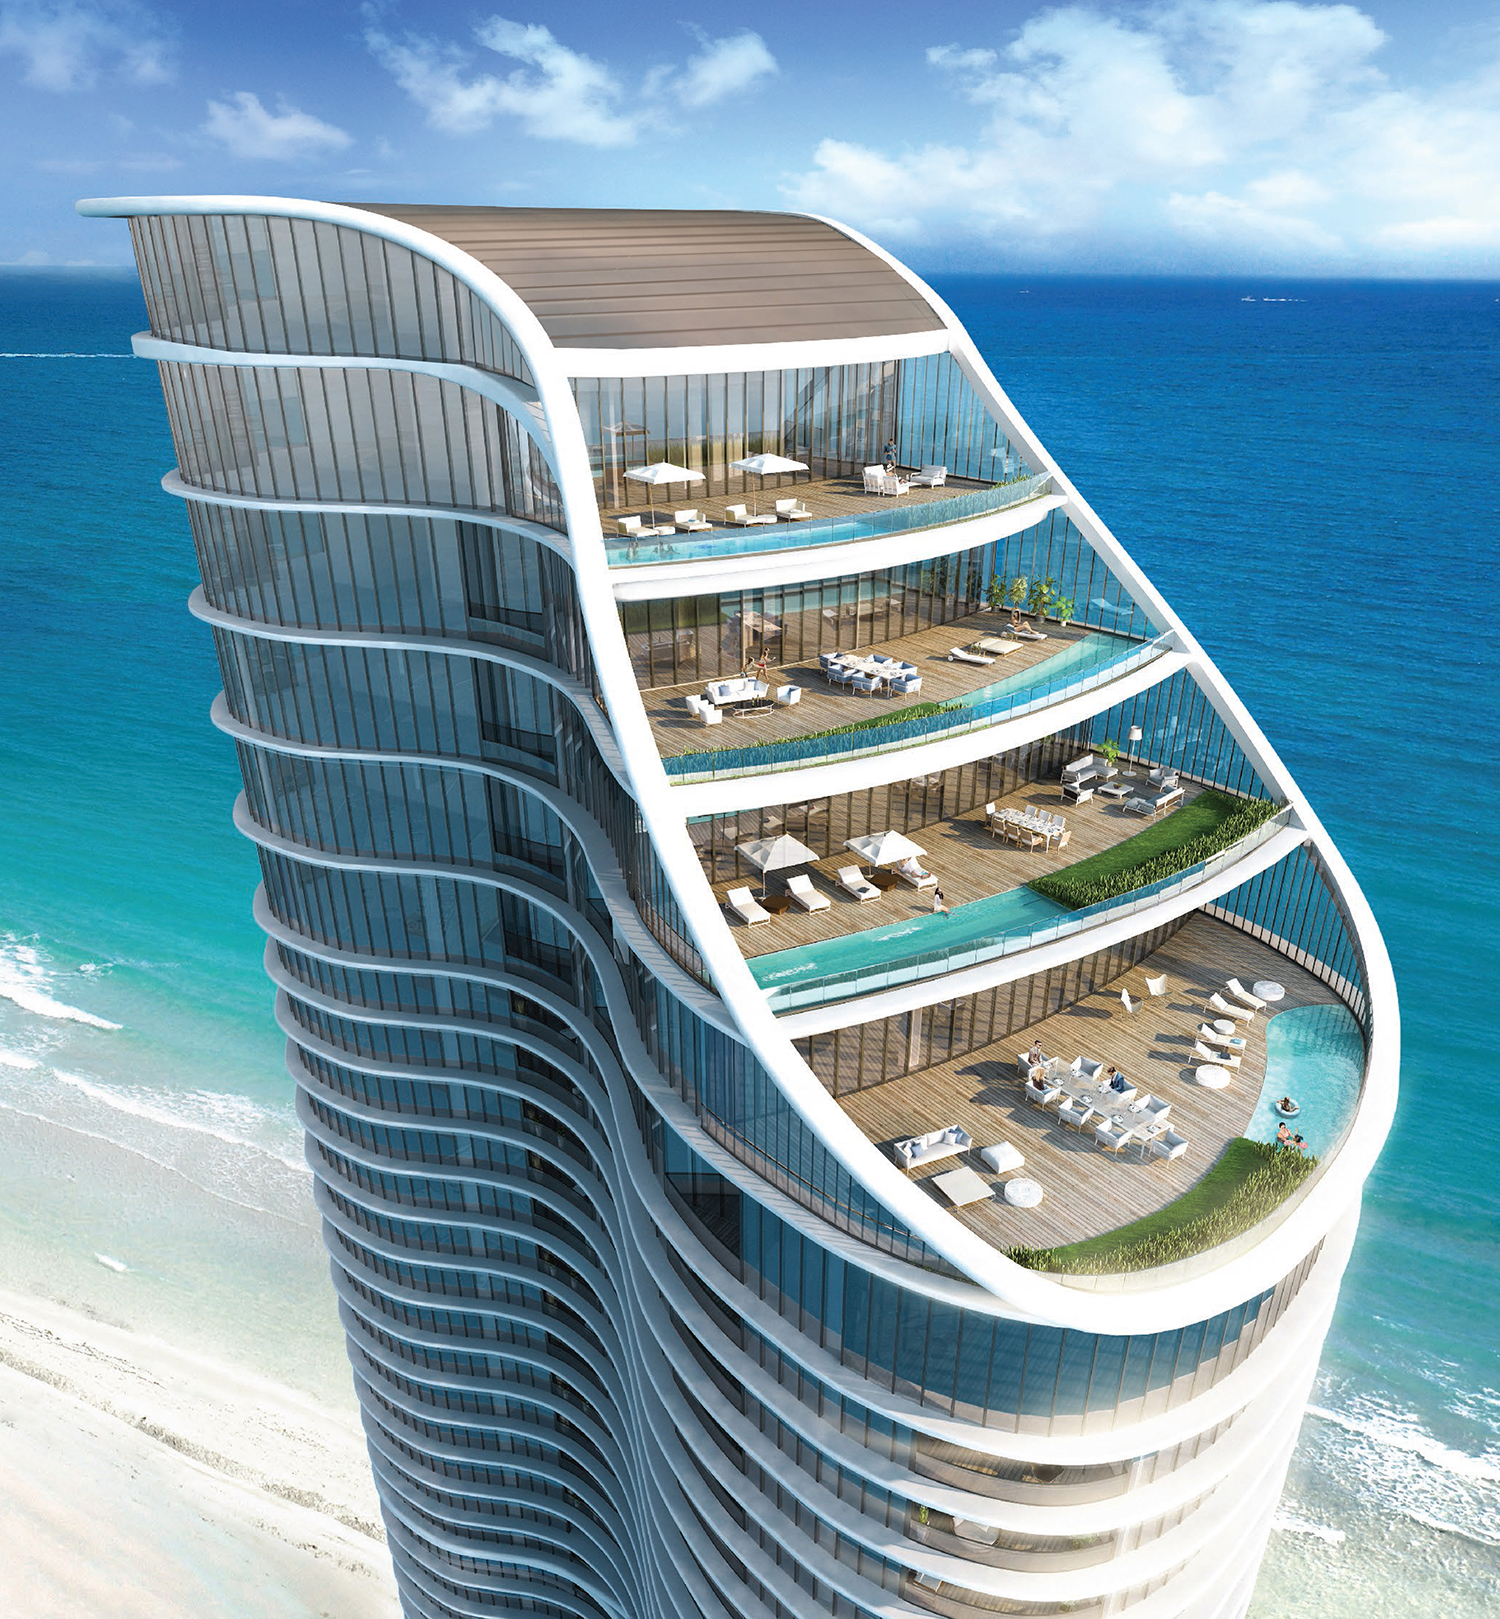 Amazing Sunny Isles Beach Pictures & Backgrounds